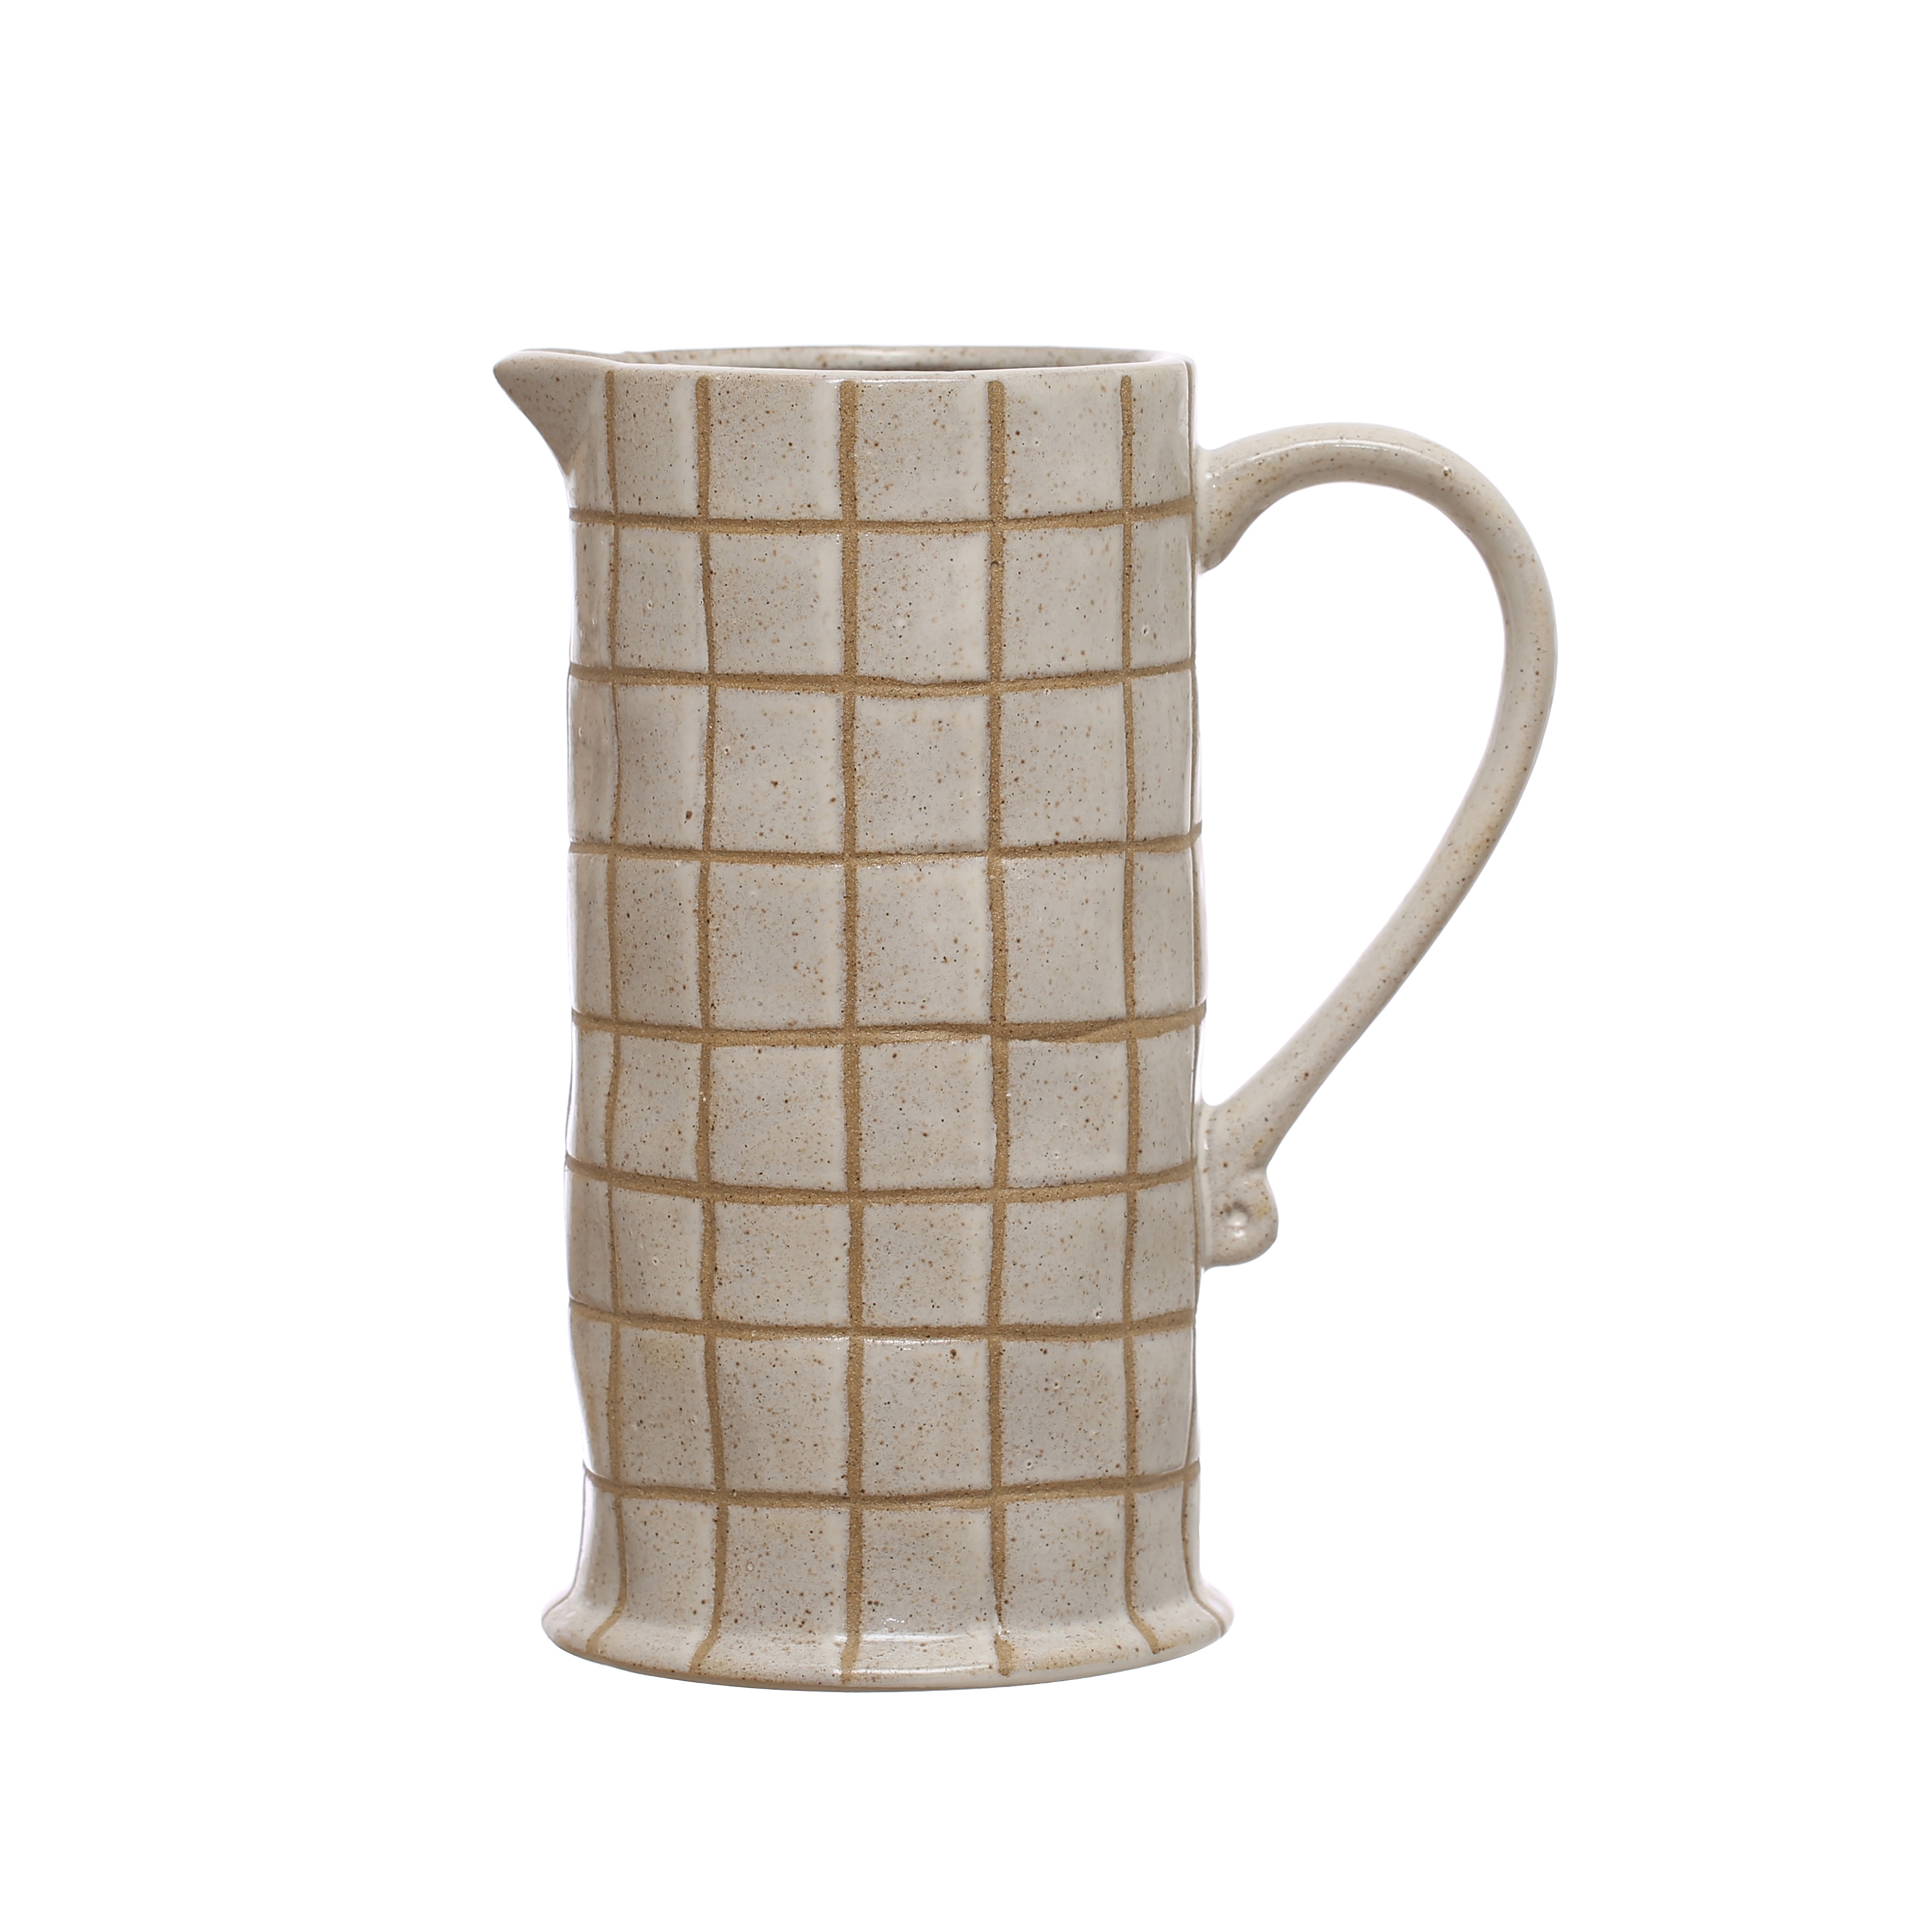 8.5 Inches 46-Ounce Stoneware Pitcher with Wax Relief Grid Pattern in Reactive Glaze, Cream and Brown - Image 0